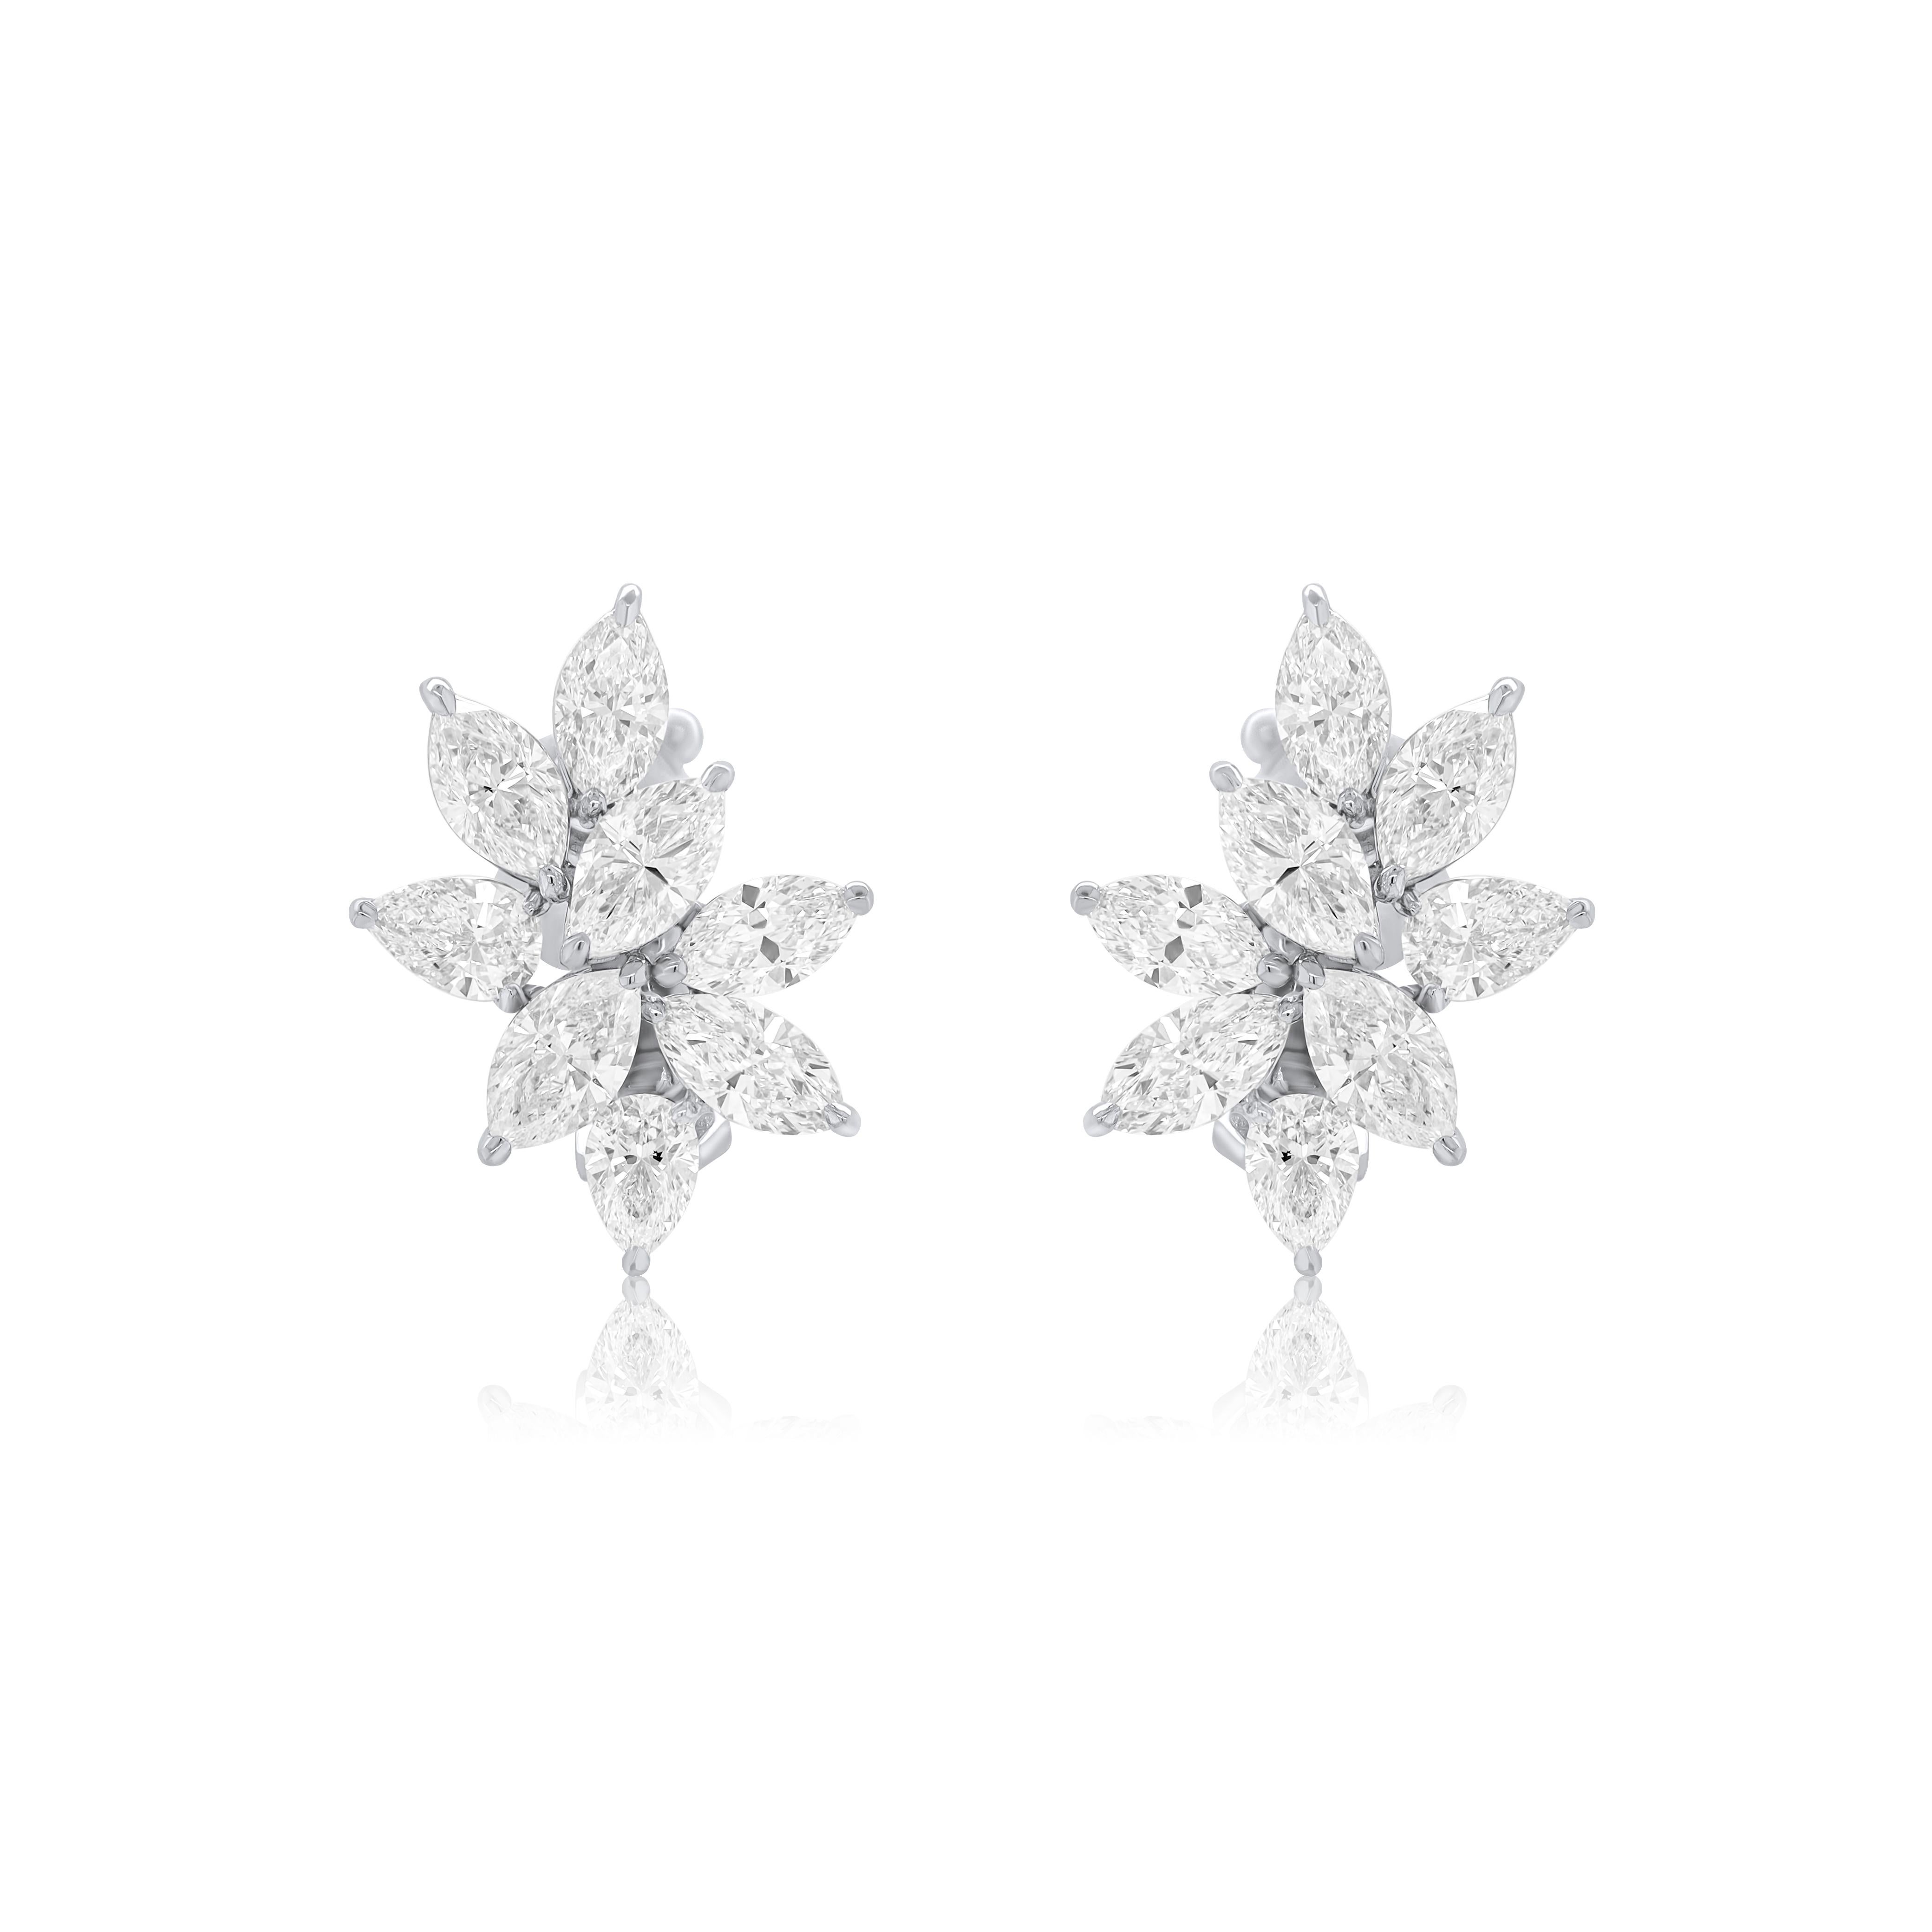 PLATINUM CLUSTER DIAMOND EARRINGS 11.20CTS OF MARQUISE AND PEAR SHAPE DIAMONDS;F-G/VS-SI
Diana M is one-stop shop for all your jewelry shopping, carrying line of diamond rings, earrings, bracelets, necklaces, and other fine jewelry.
We create our